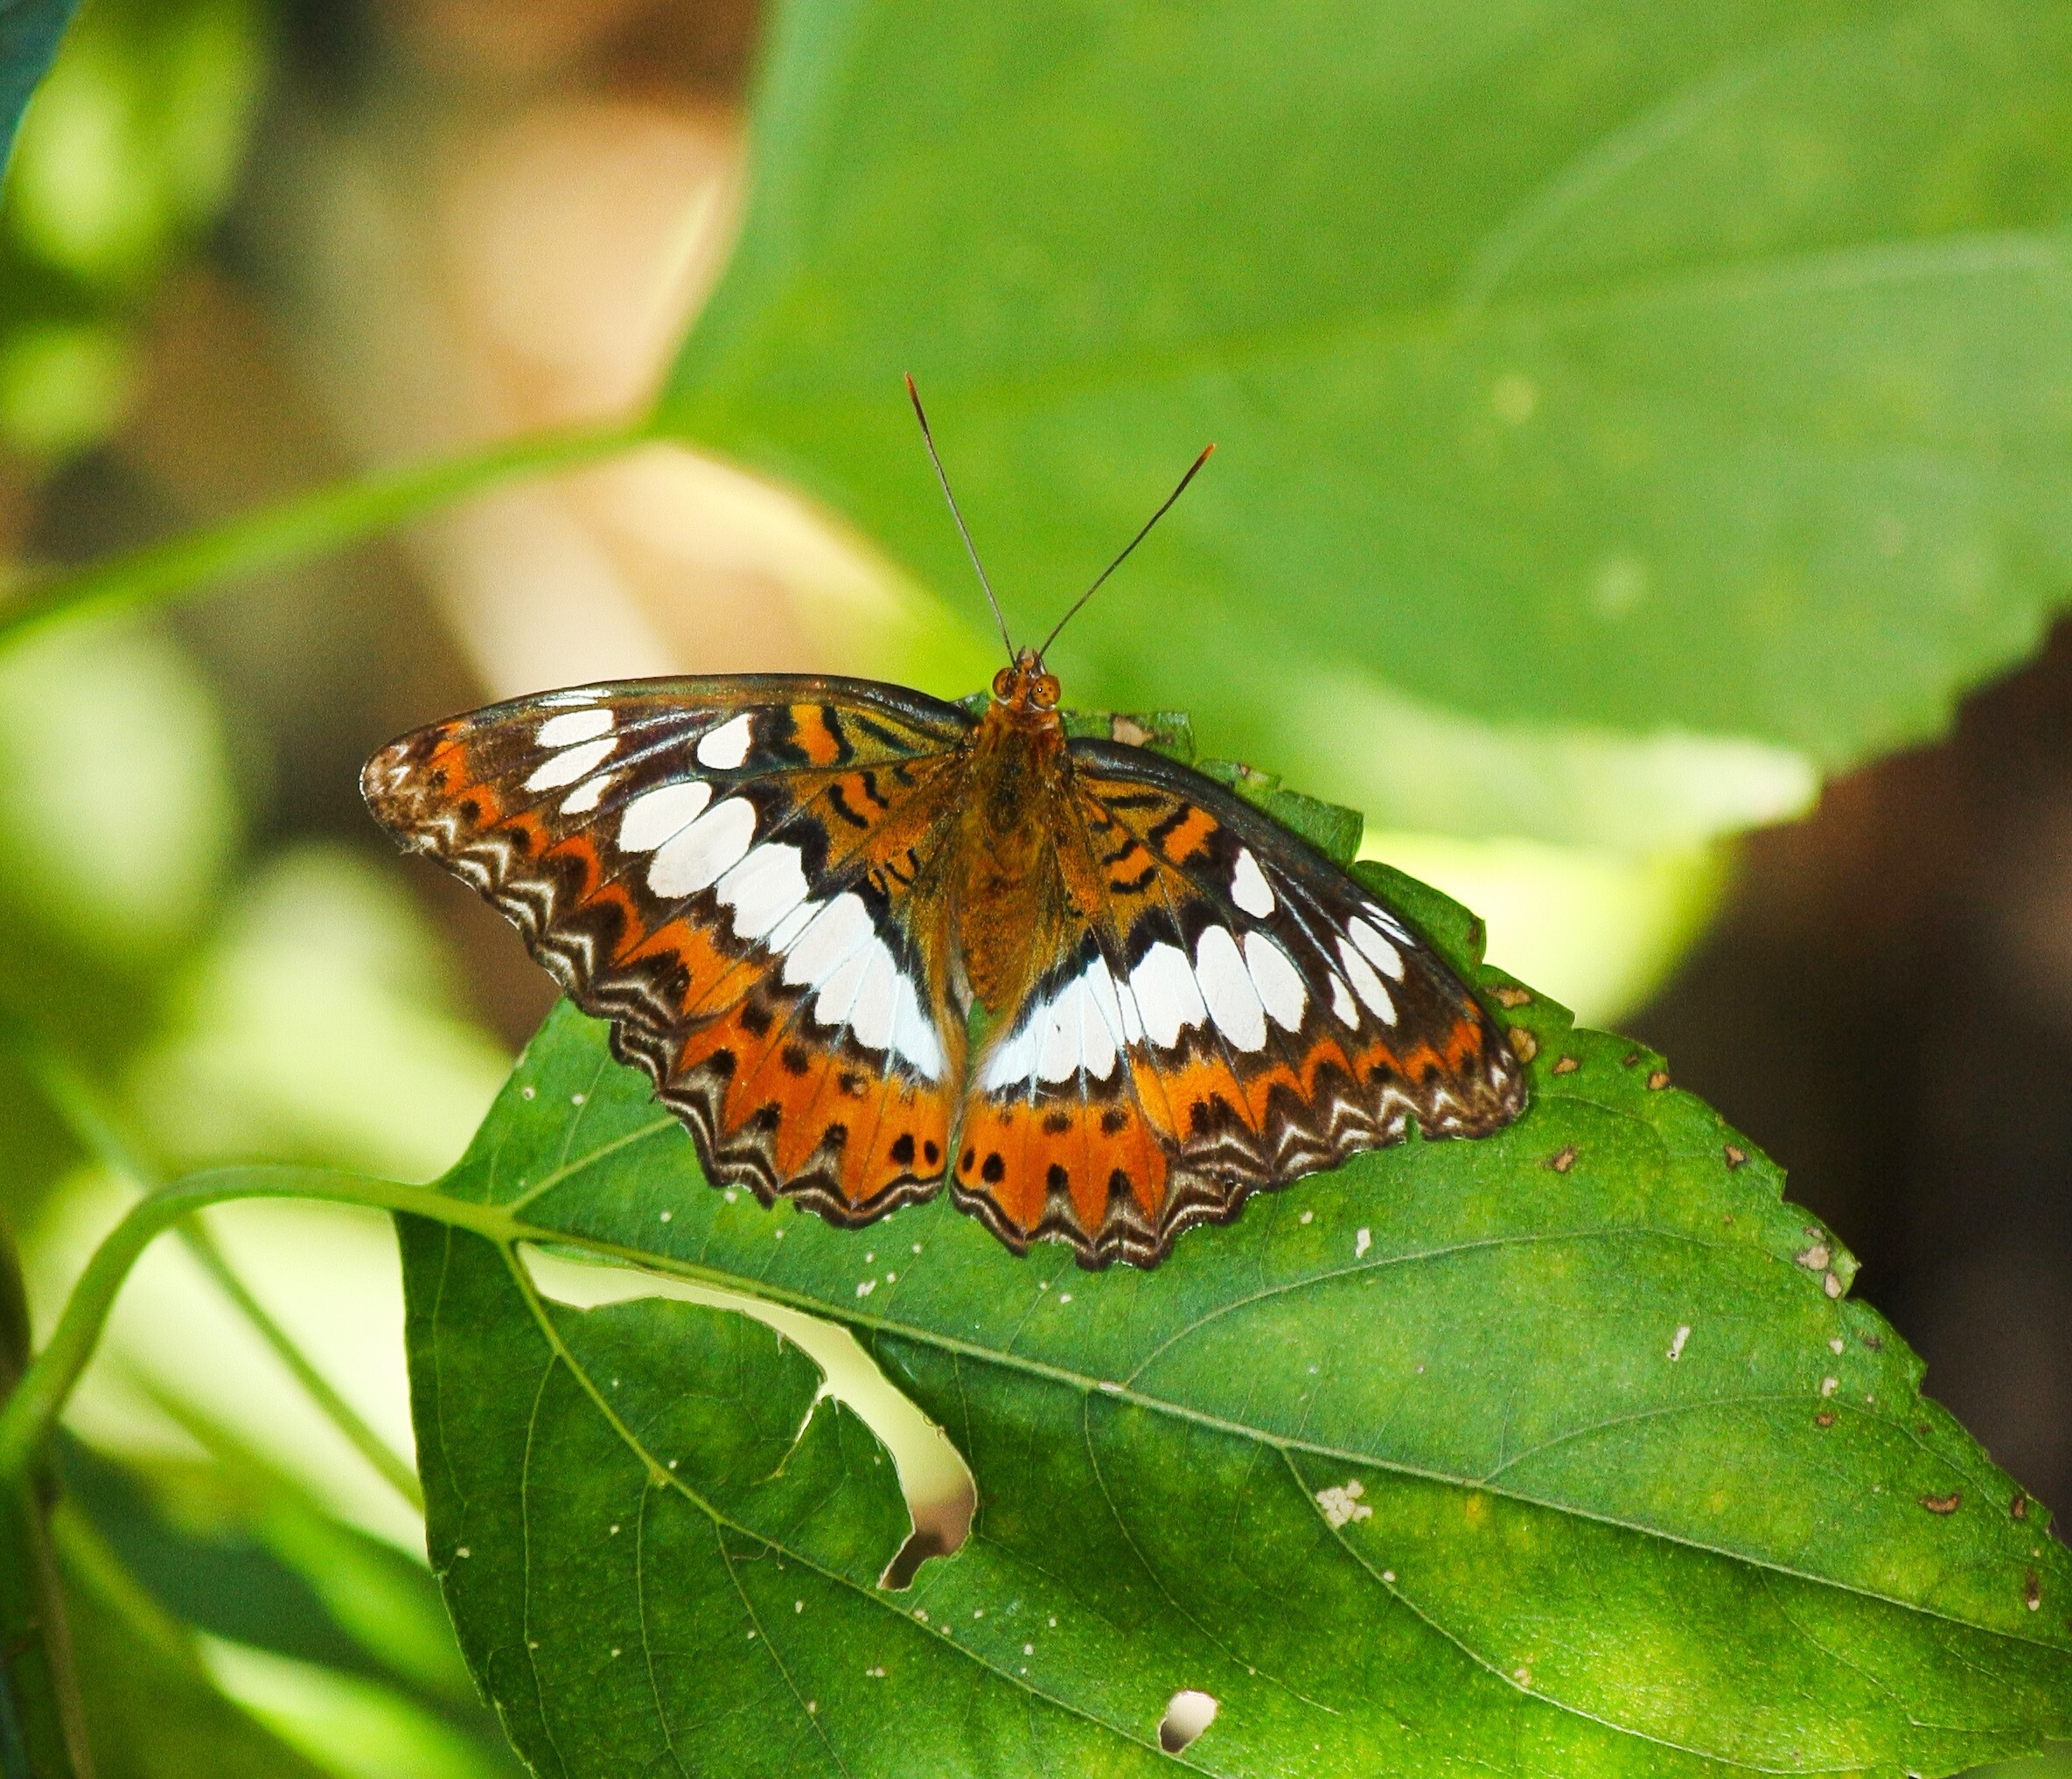 A commander butterfly photographed in Sai Kung, Hong Kong. Photo: Shutterstock